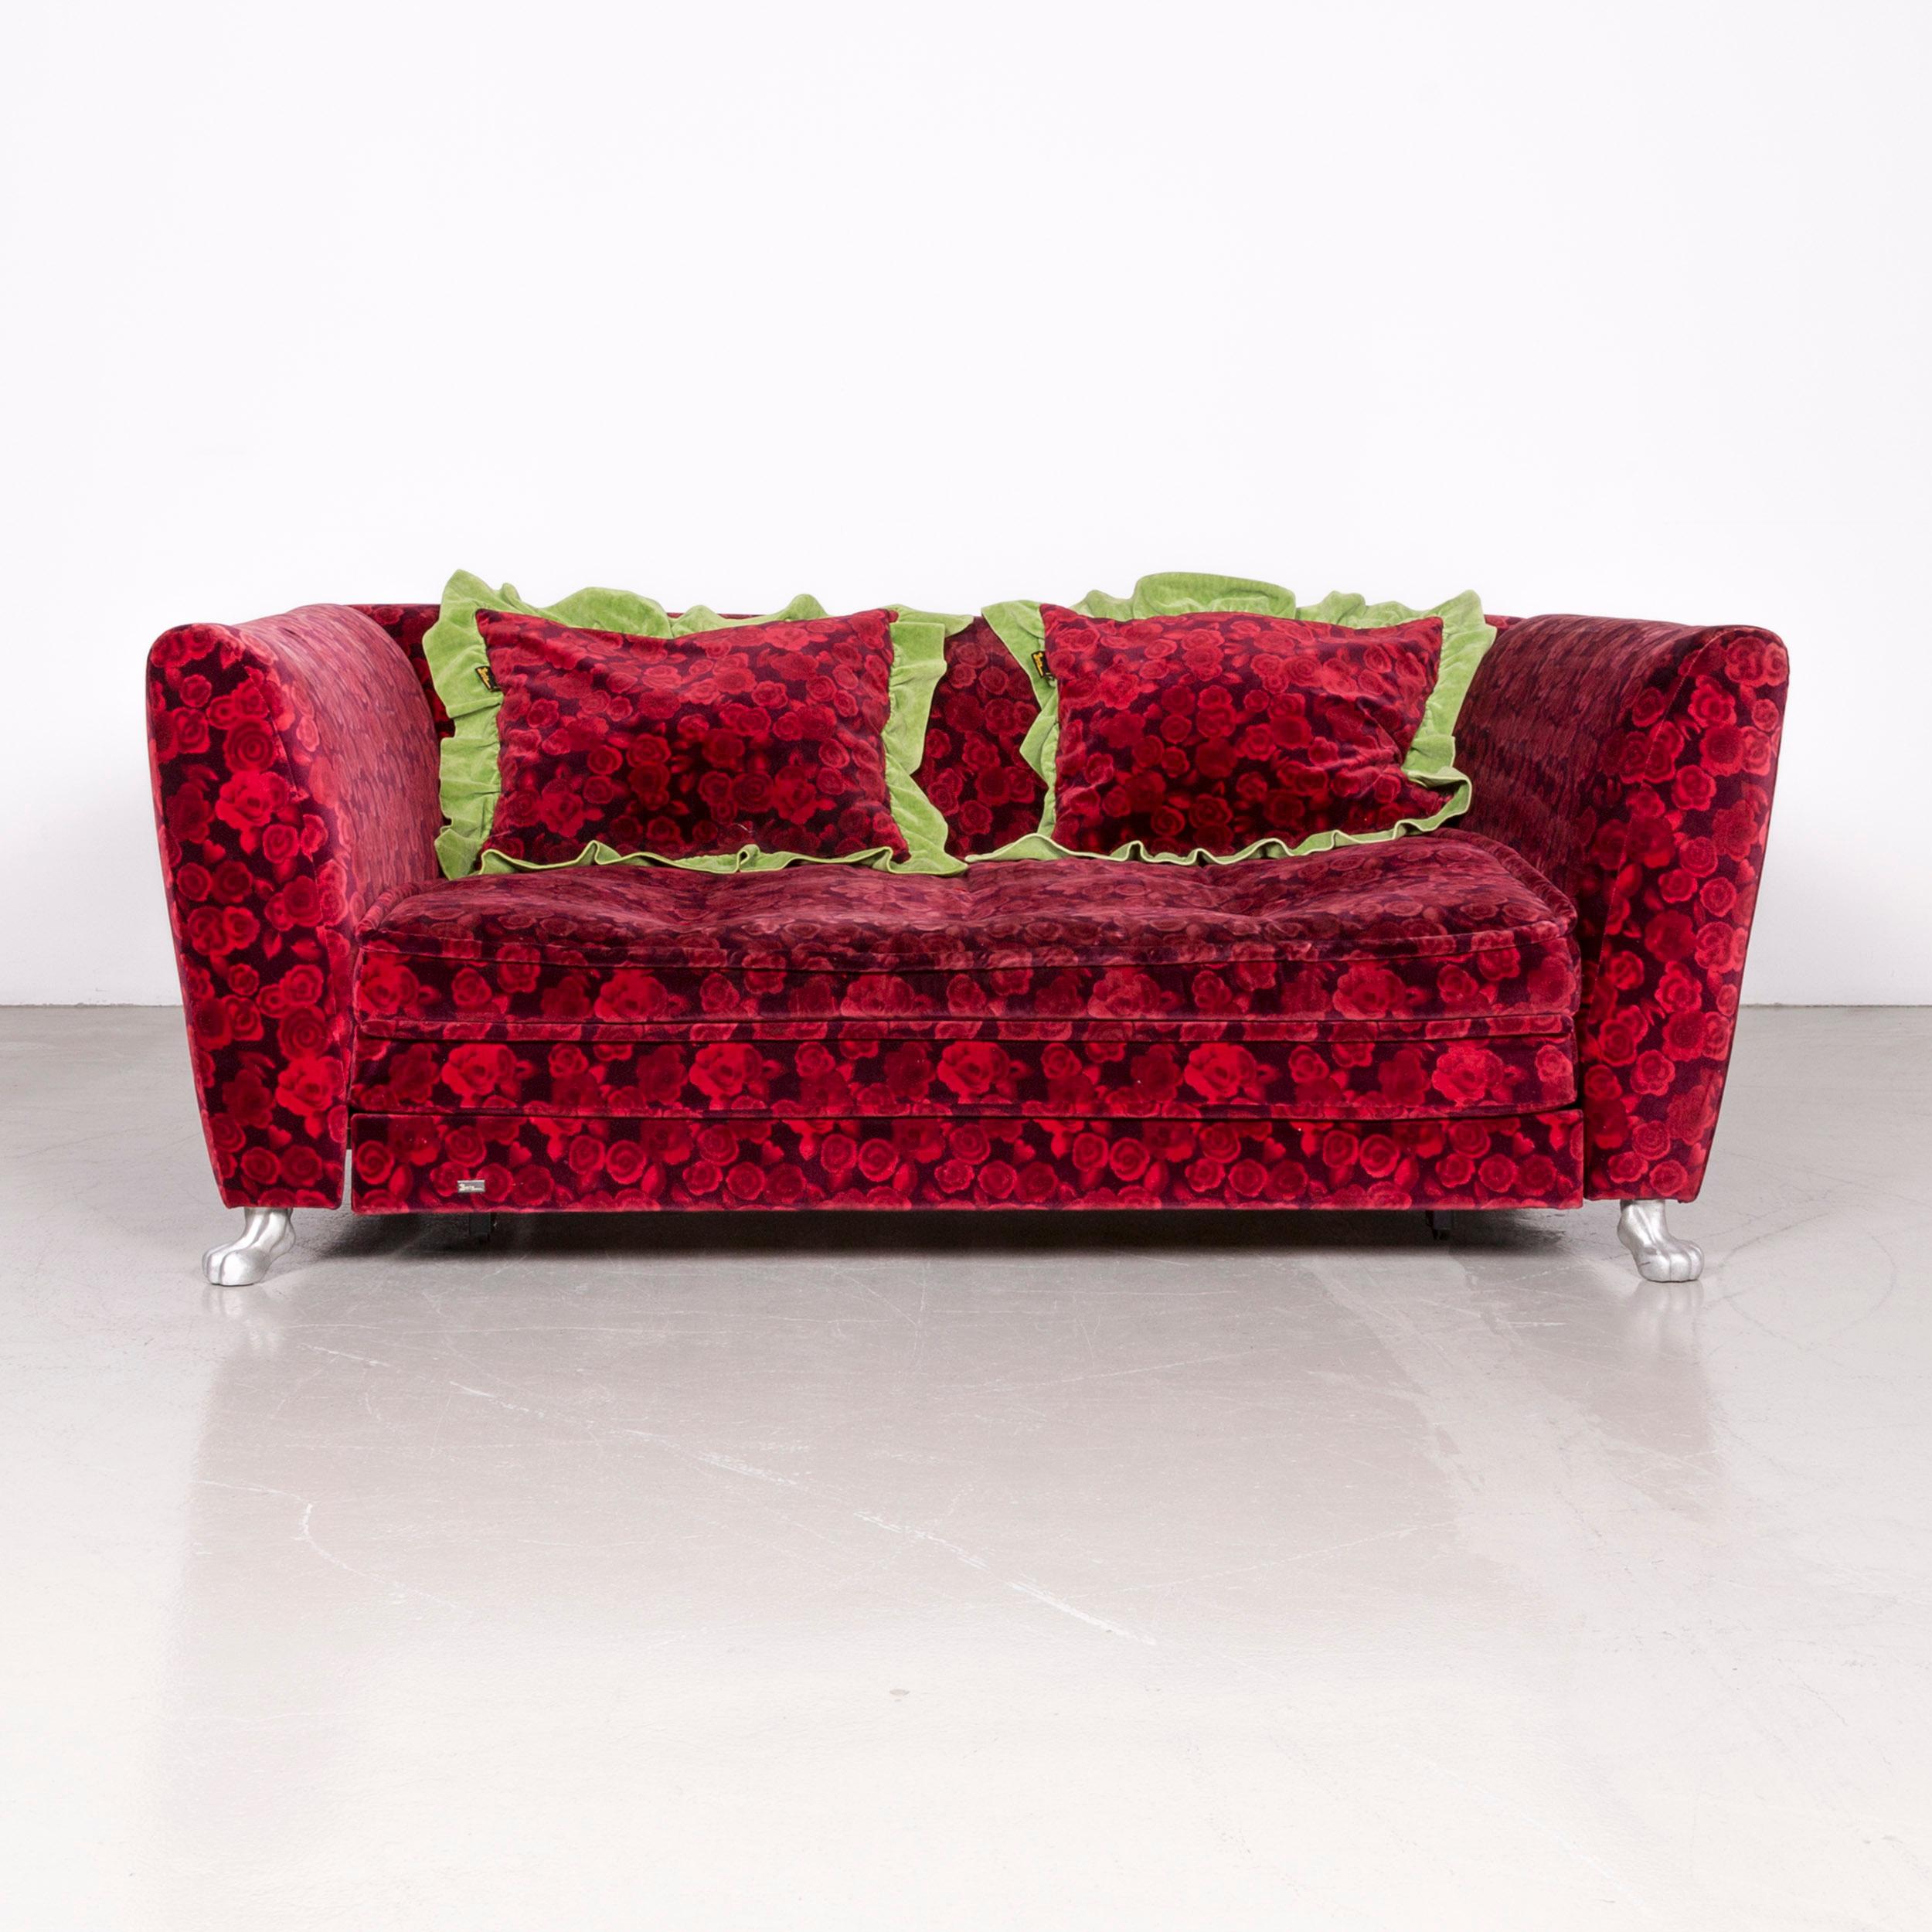 Bretz Monster fabric sofa red three-seat couch function sofa set.